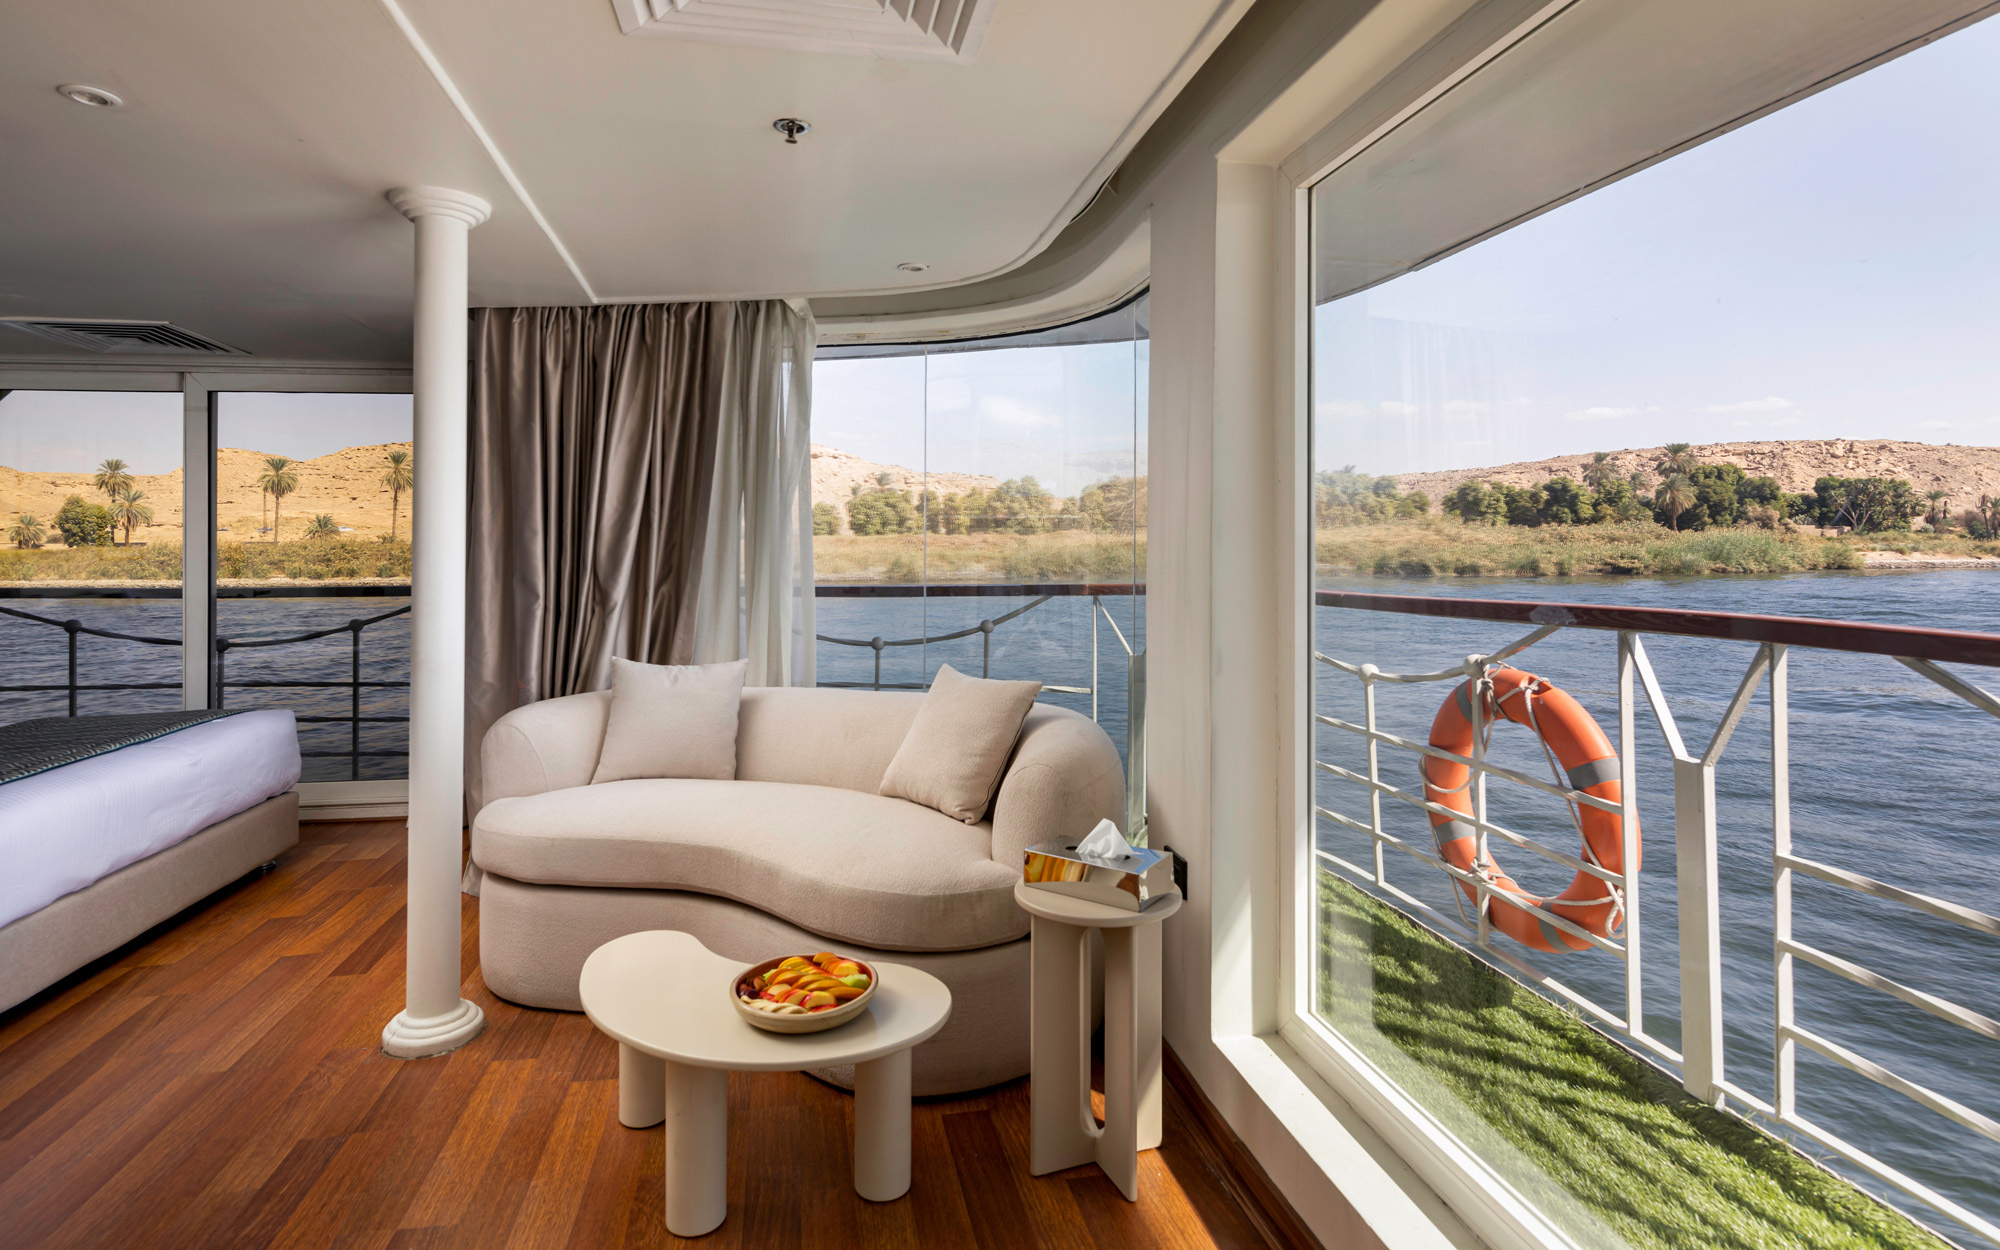 4 Days Nile Cruise from Aswan to Luxor on MS Grand Mandarin